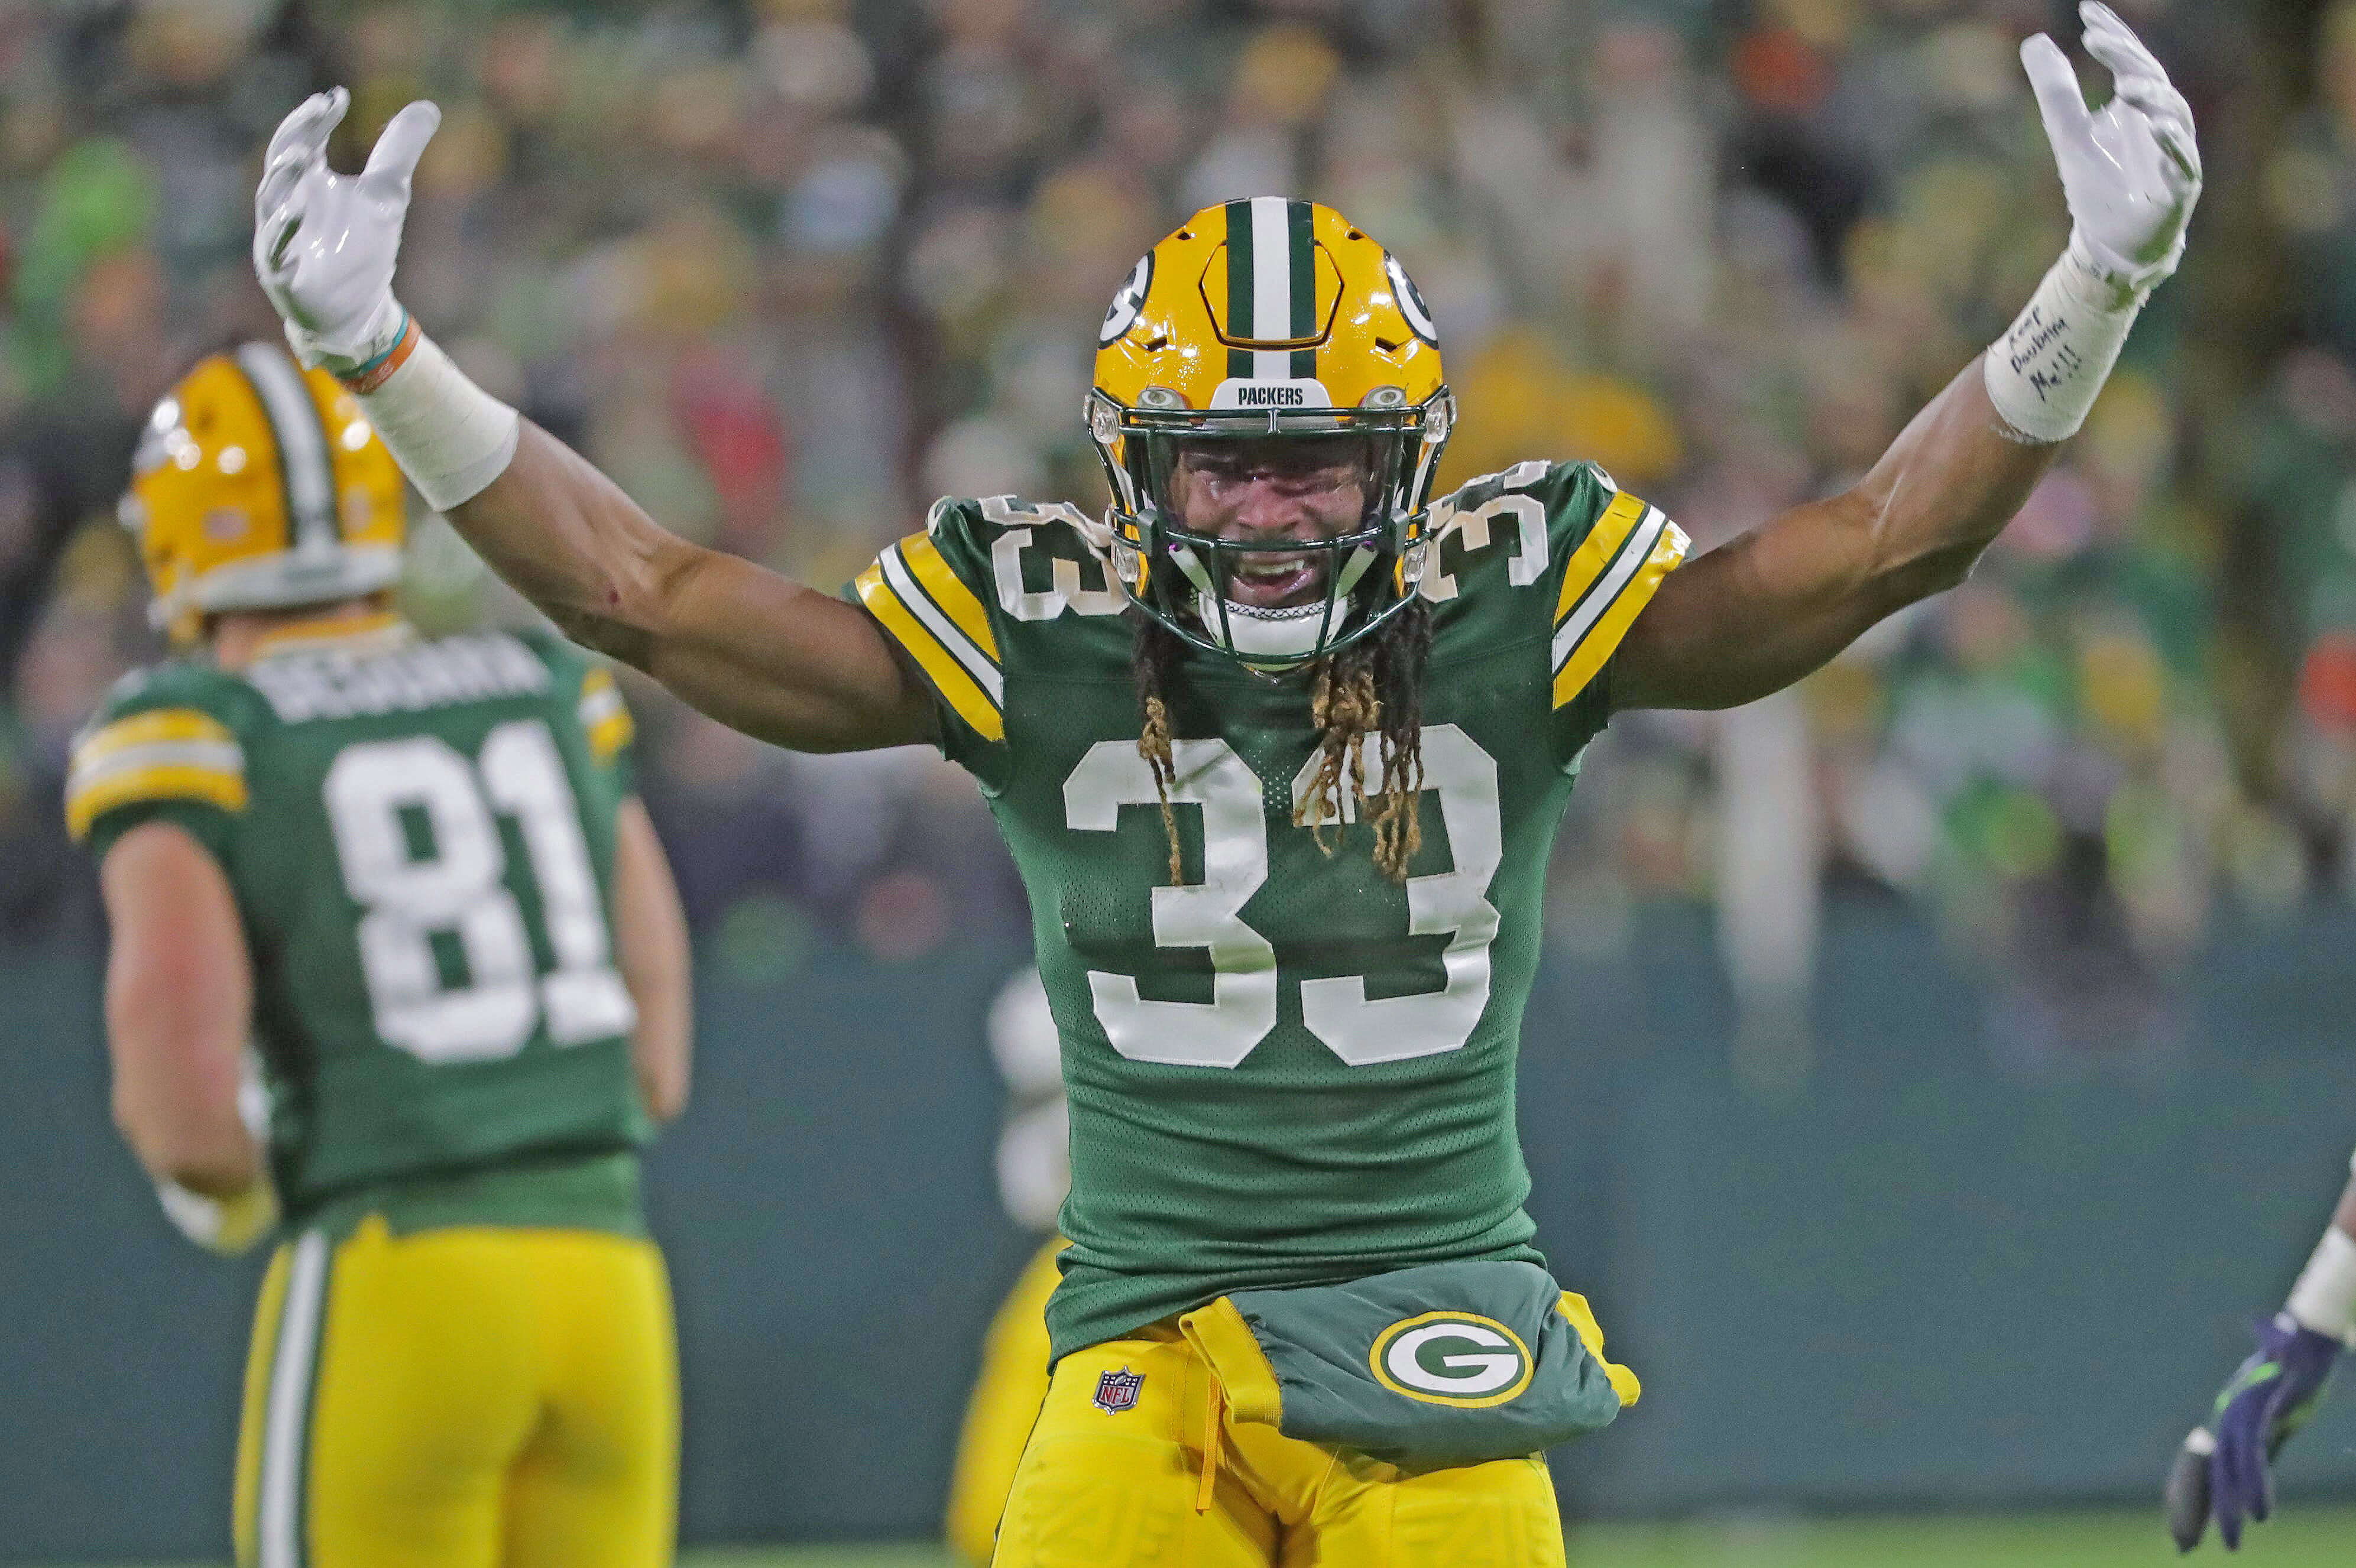 Bears vs Packers Sunday Night Football Picks and Predictions: Jones Goes Over His Receiving Total